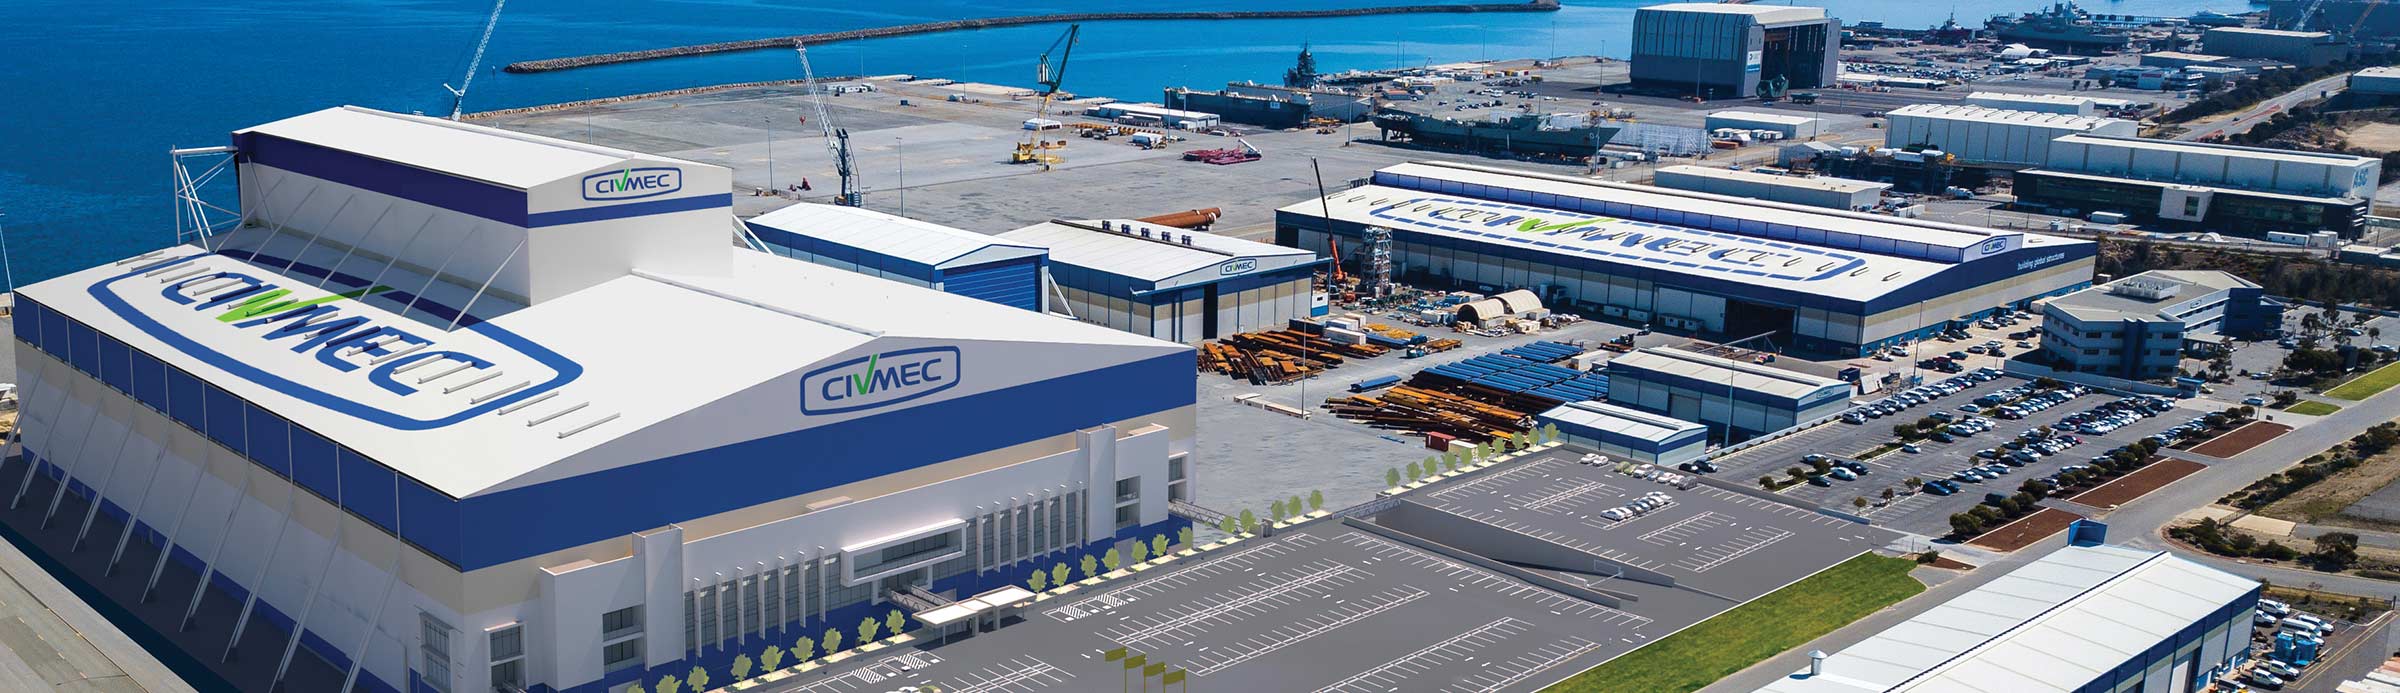 Woodside contract goes to Civmec